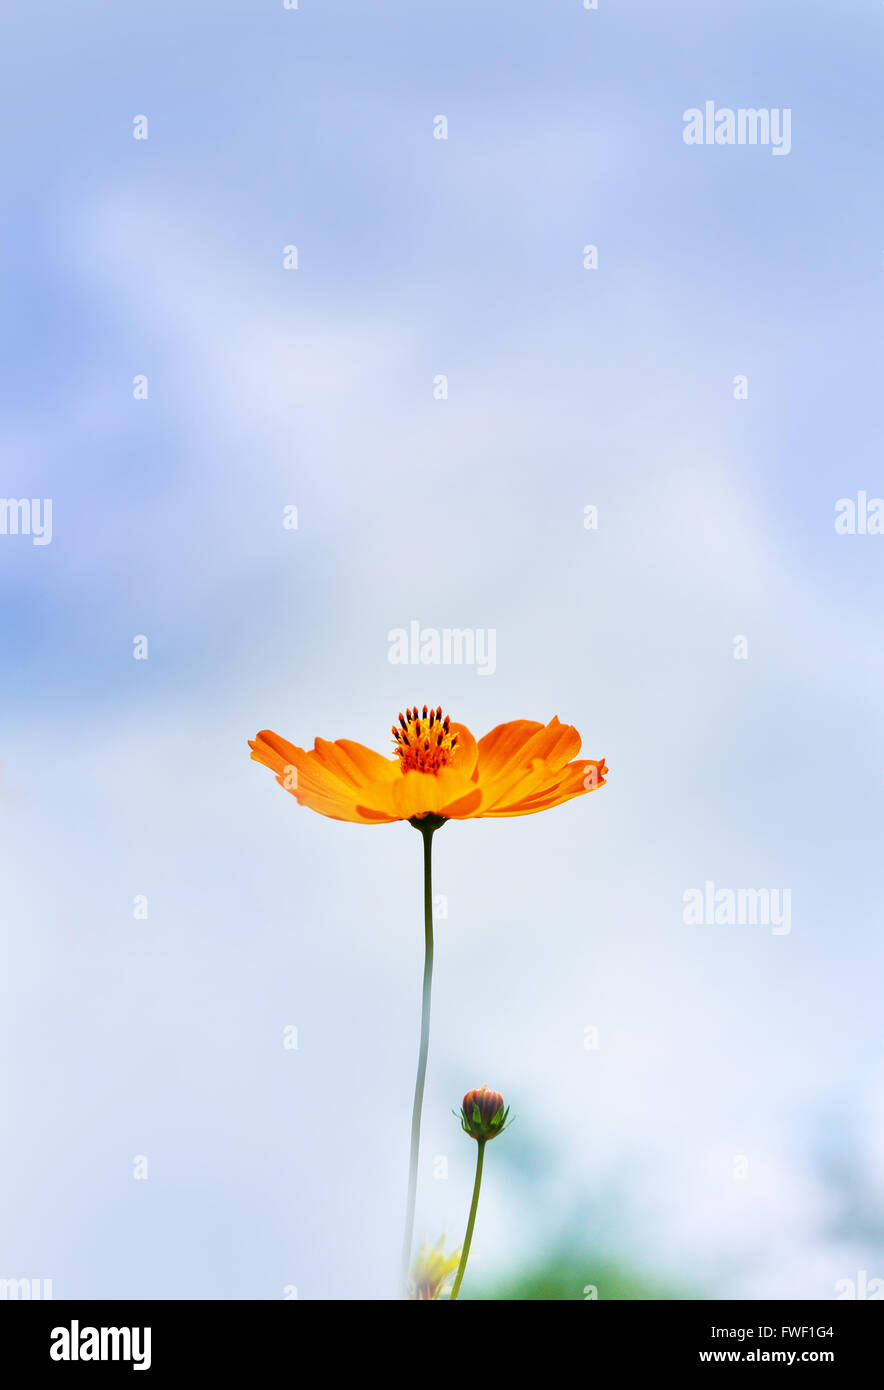 Yellow Cosmos flower with blurred sky Stock Photo